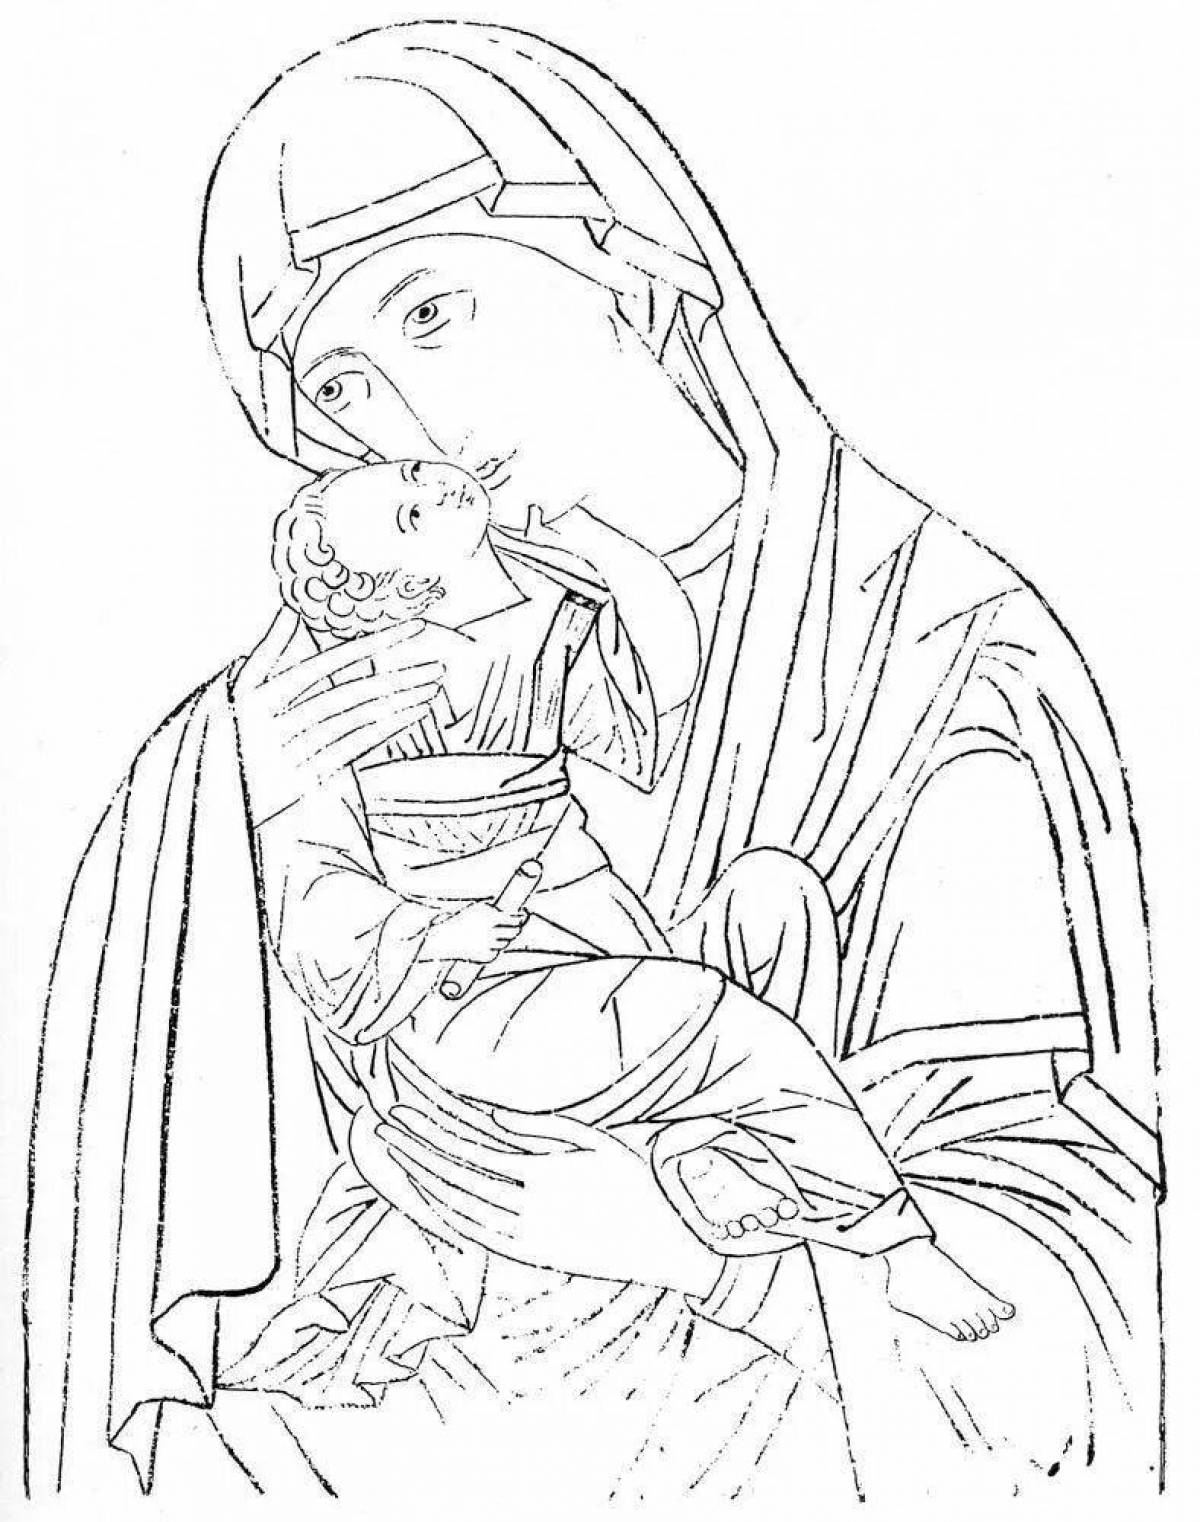 Virgin Mary and Child #5